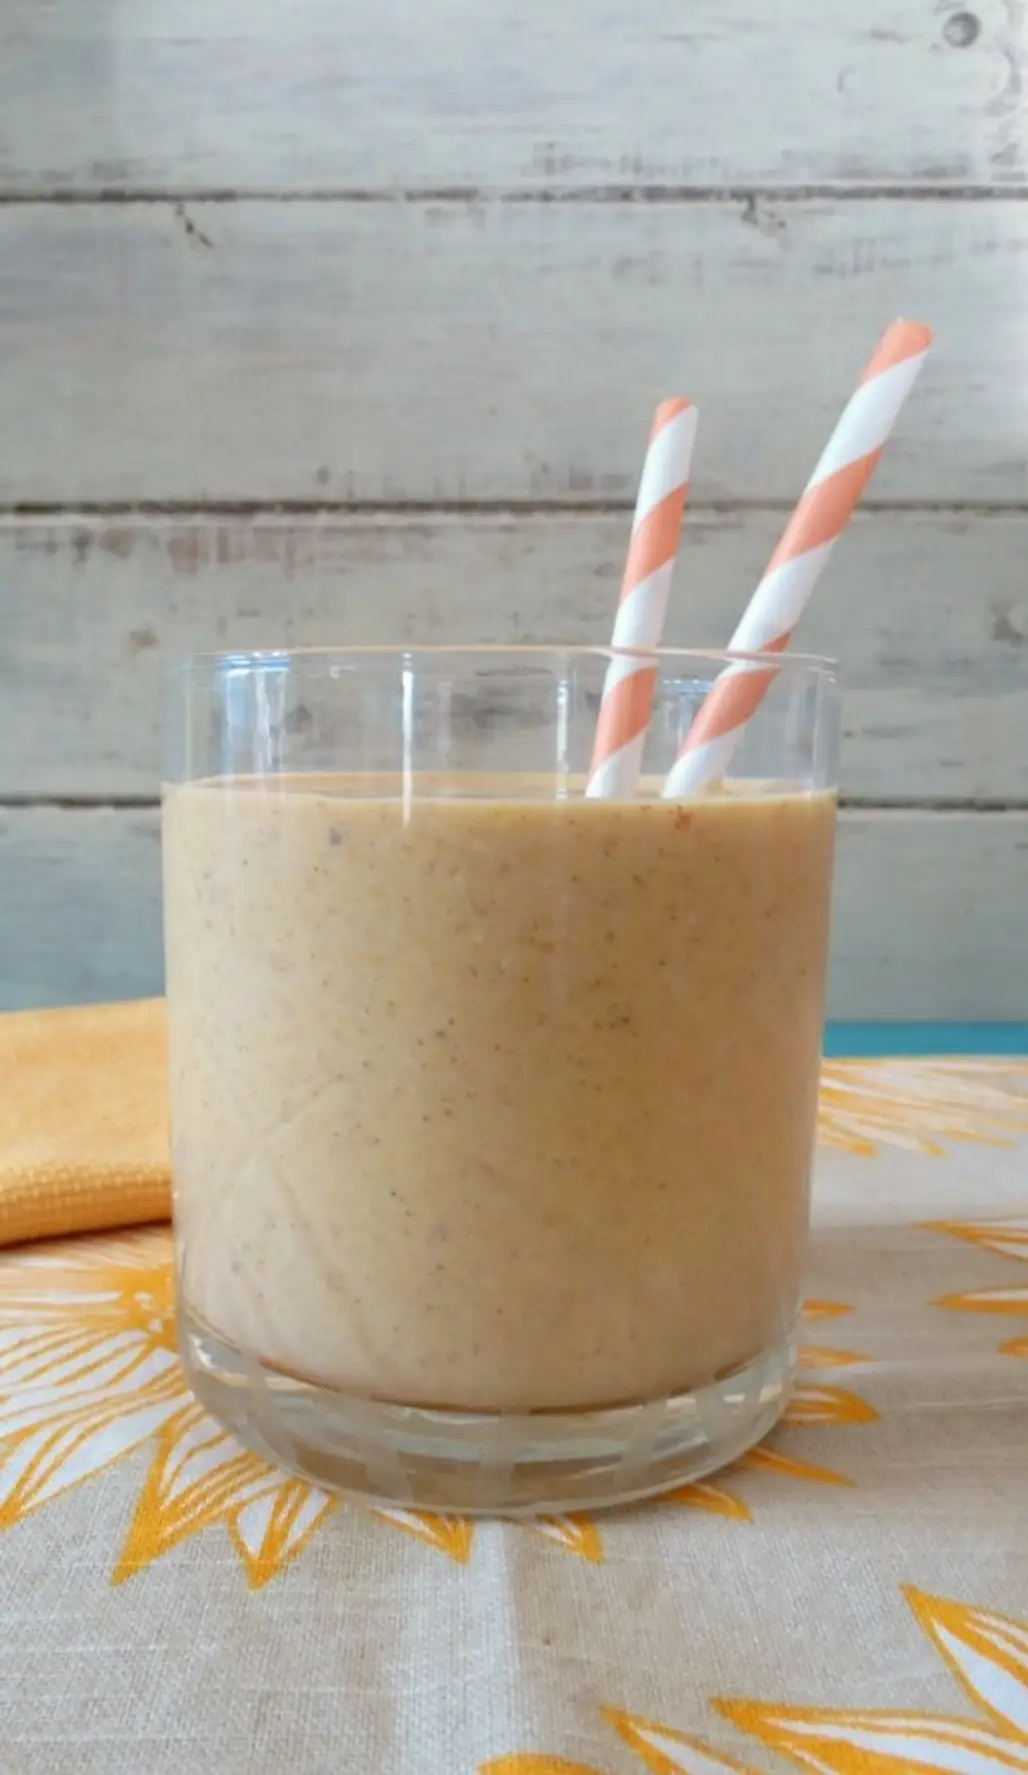 Spiced Oatmeal Smoothie